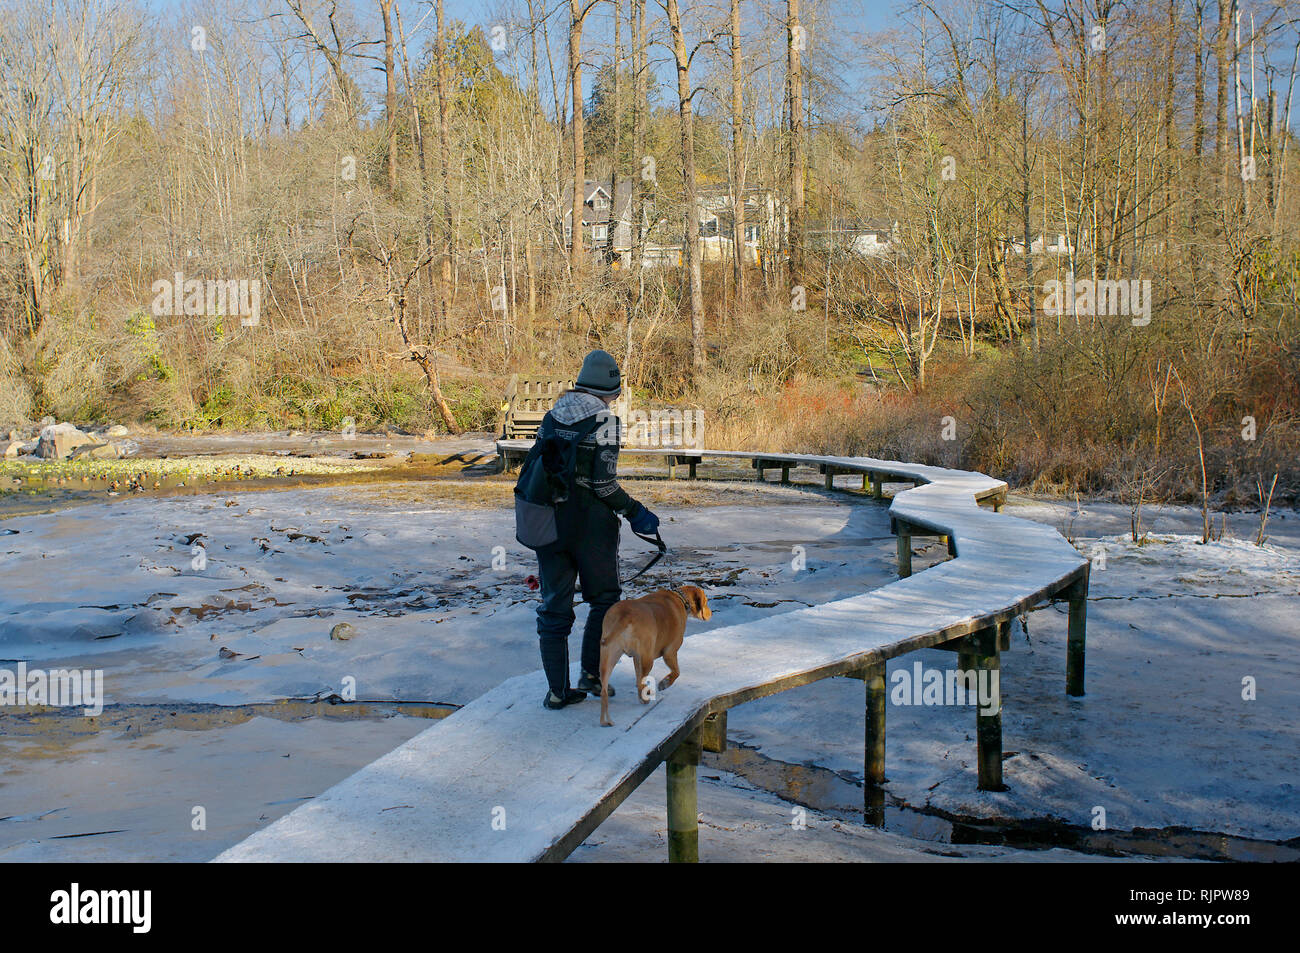 A woman walking her dog along the slippery, snow-covered boardwalk in Shoreline Park, Rocky Point, Port Moody, British Columbia, Canada. Stock Photo